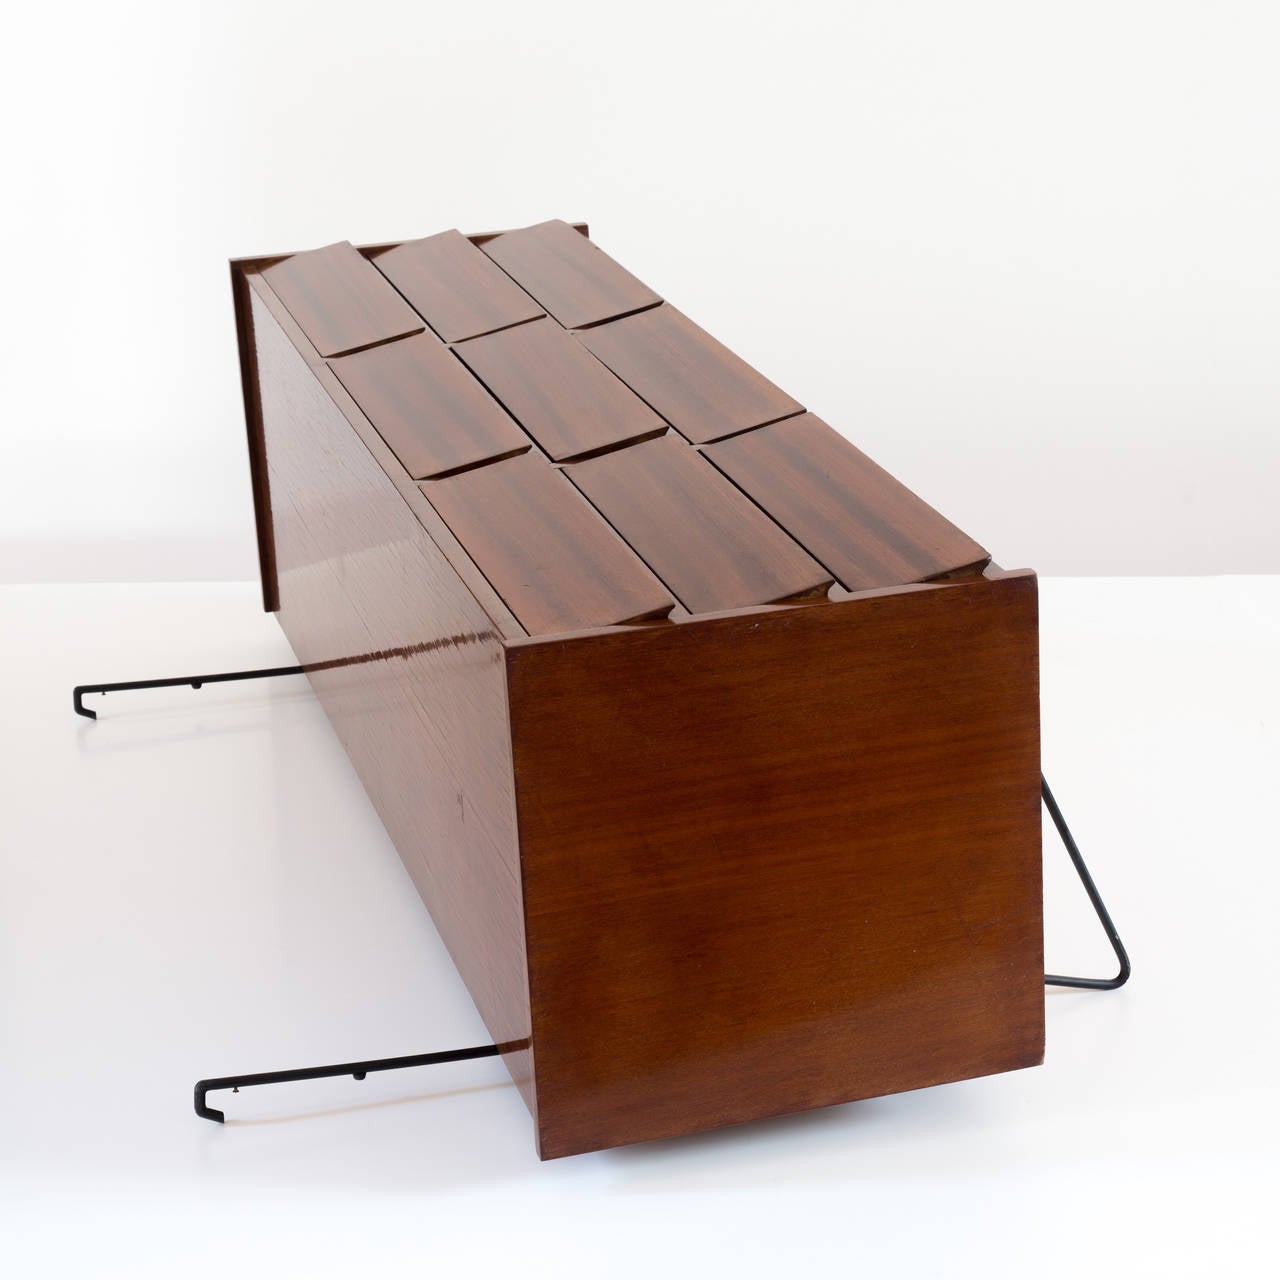 Italian Sergio Conti, Marisa Forlani and Luciano Grassi Hanging Chest of Drawers